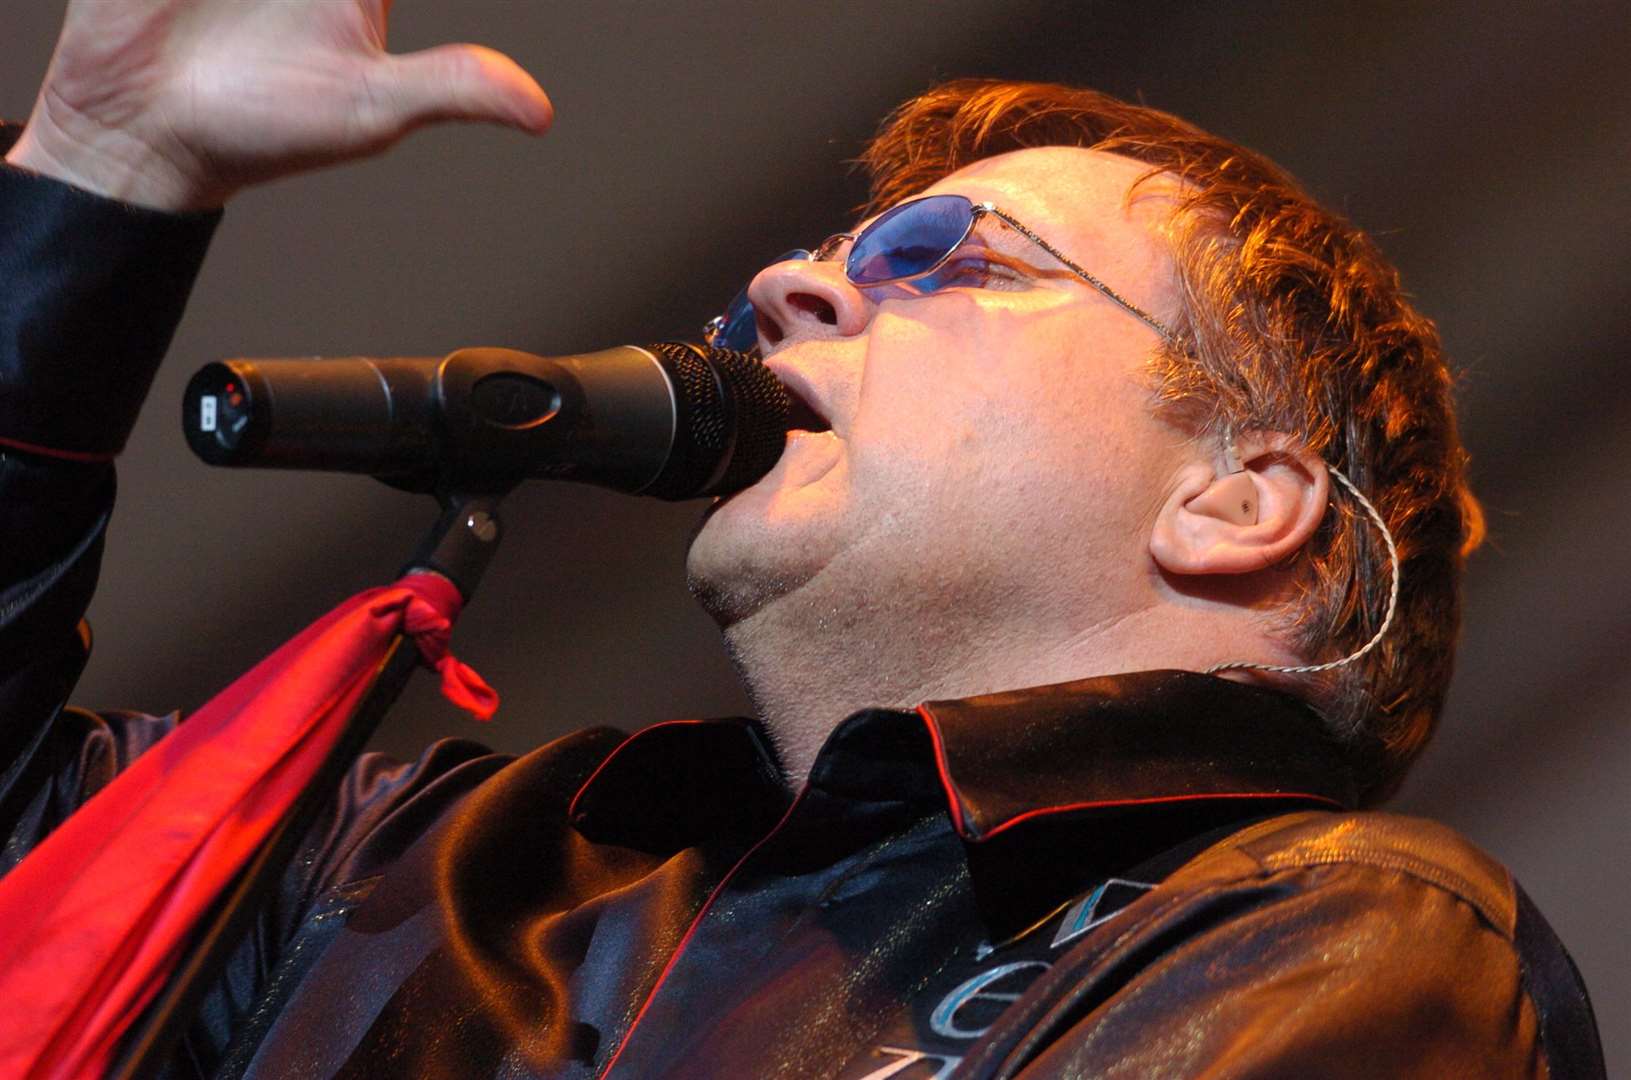 Meat Loaf was described as "a real gentleman" when he visited Kent in 2005